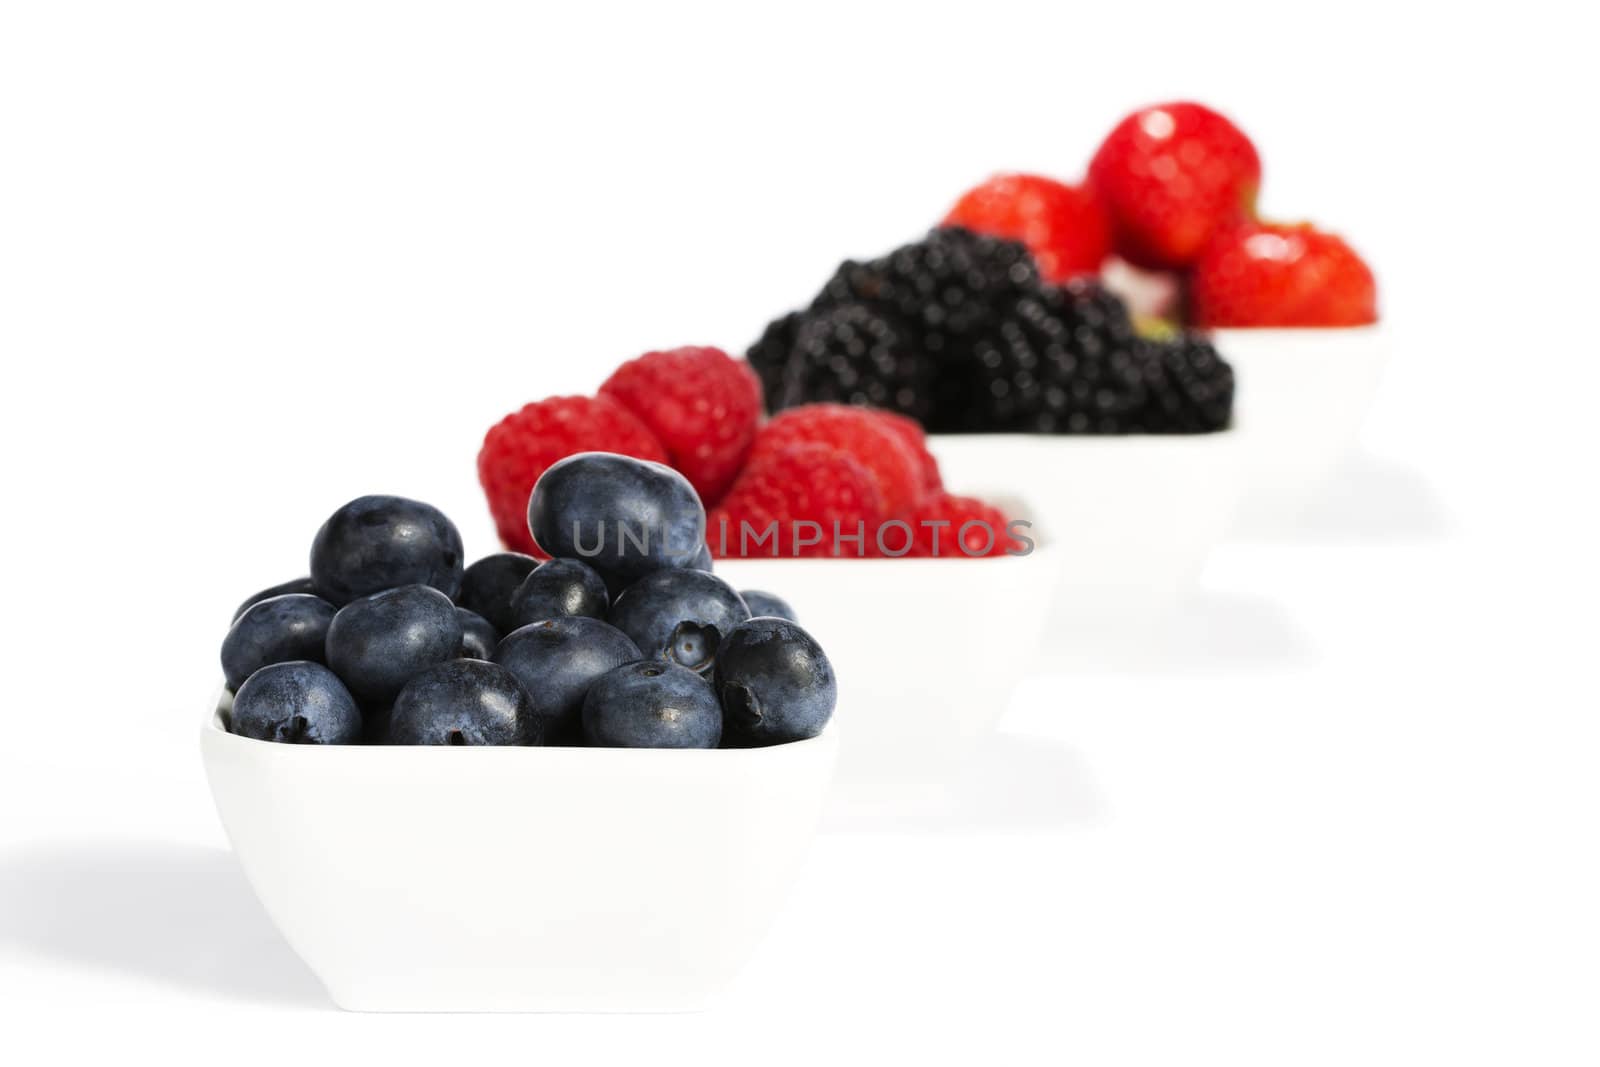 blueberries in a bowl with other wild berries in background on white background